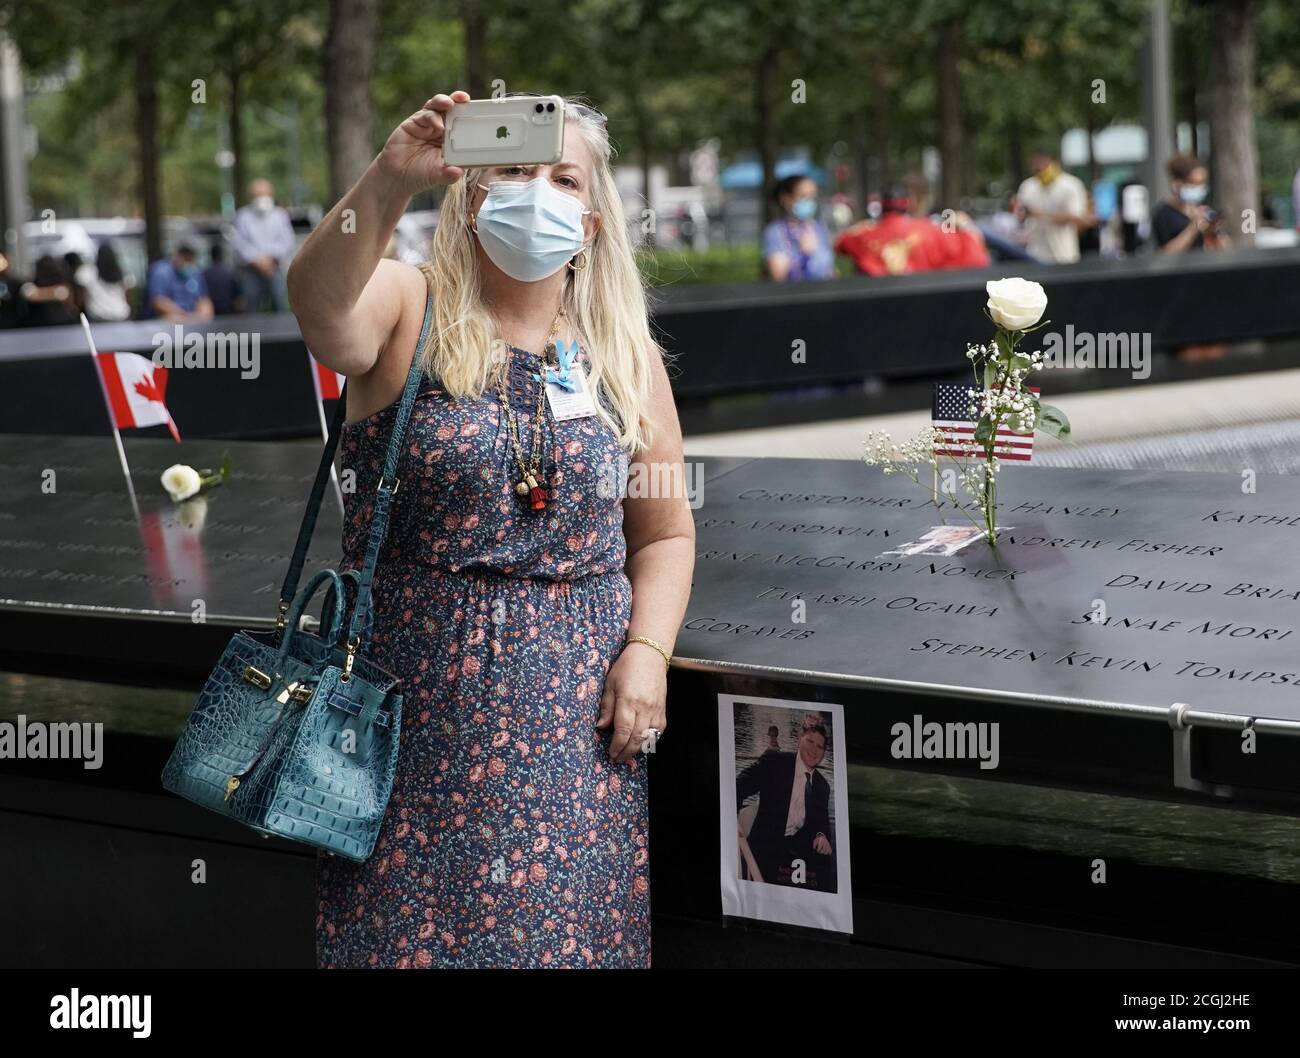 New York, United States. 11th Sep, 2020. A mourner takes a selfie at the 9/11 Memorial Reflecting Pools in Lower Manhattan near One World Trade Center on the 19th anniversary of the 9/11 terrorist attacks on the World Trade Center at Ground Zero in New York City on Friday, September 11, 2020. Photo by John Angelillo/UPI Credit: UPI/Alamy Live News Stock Photo